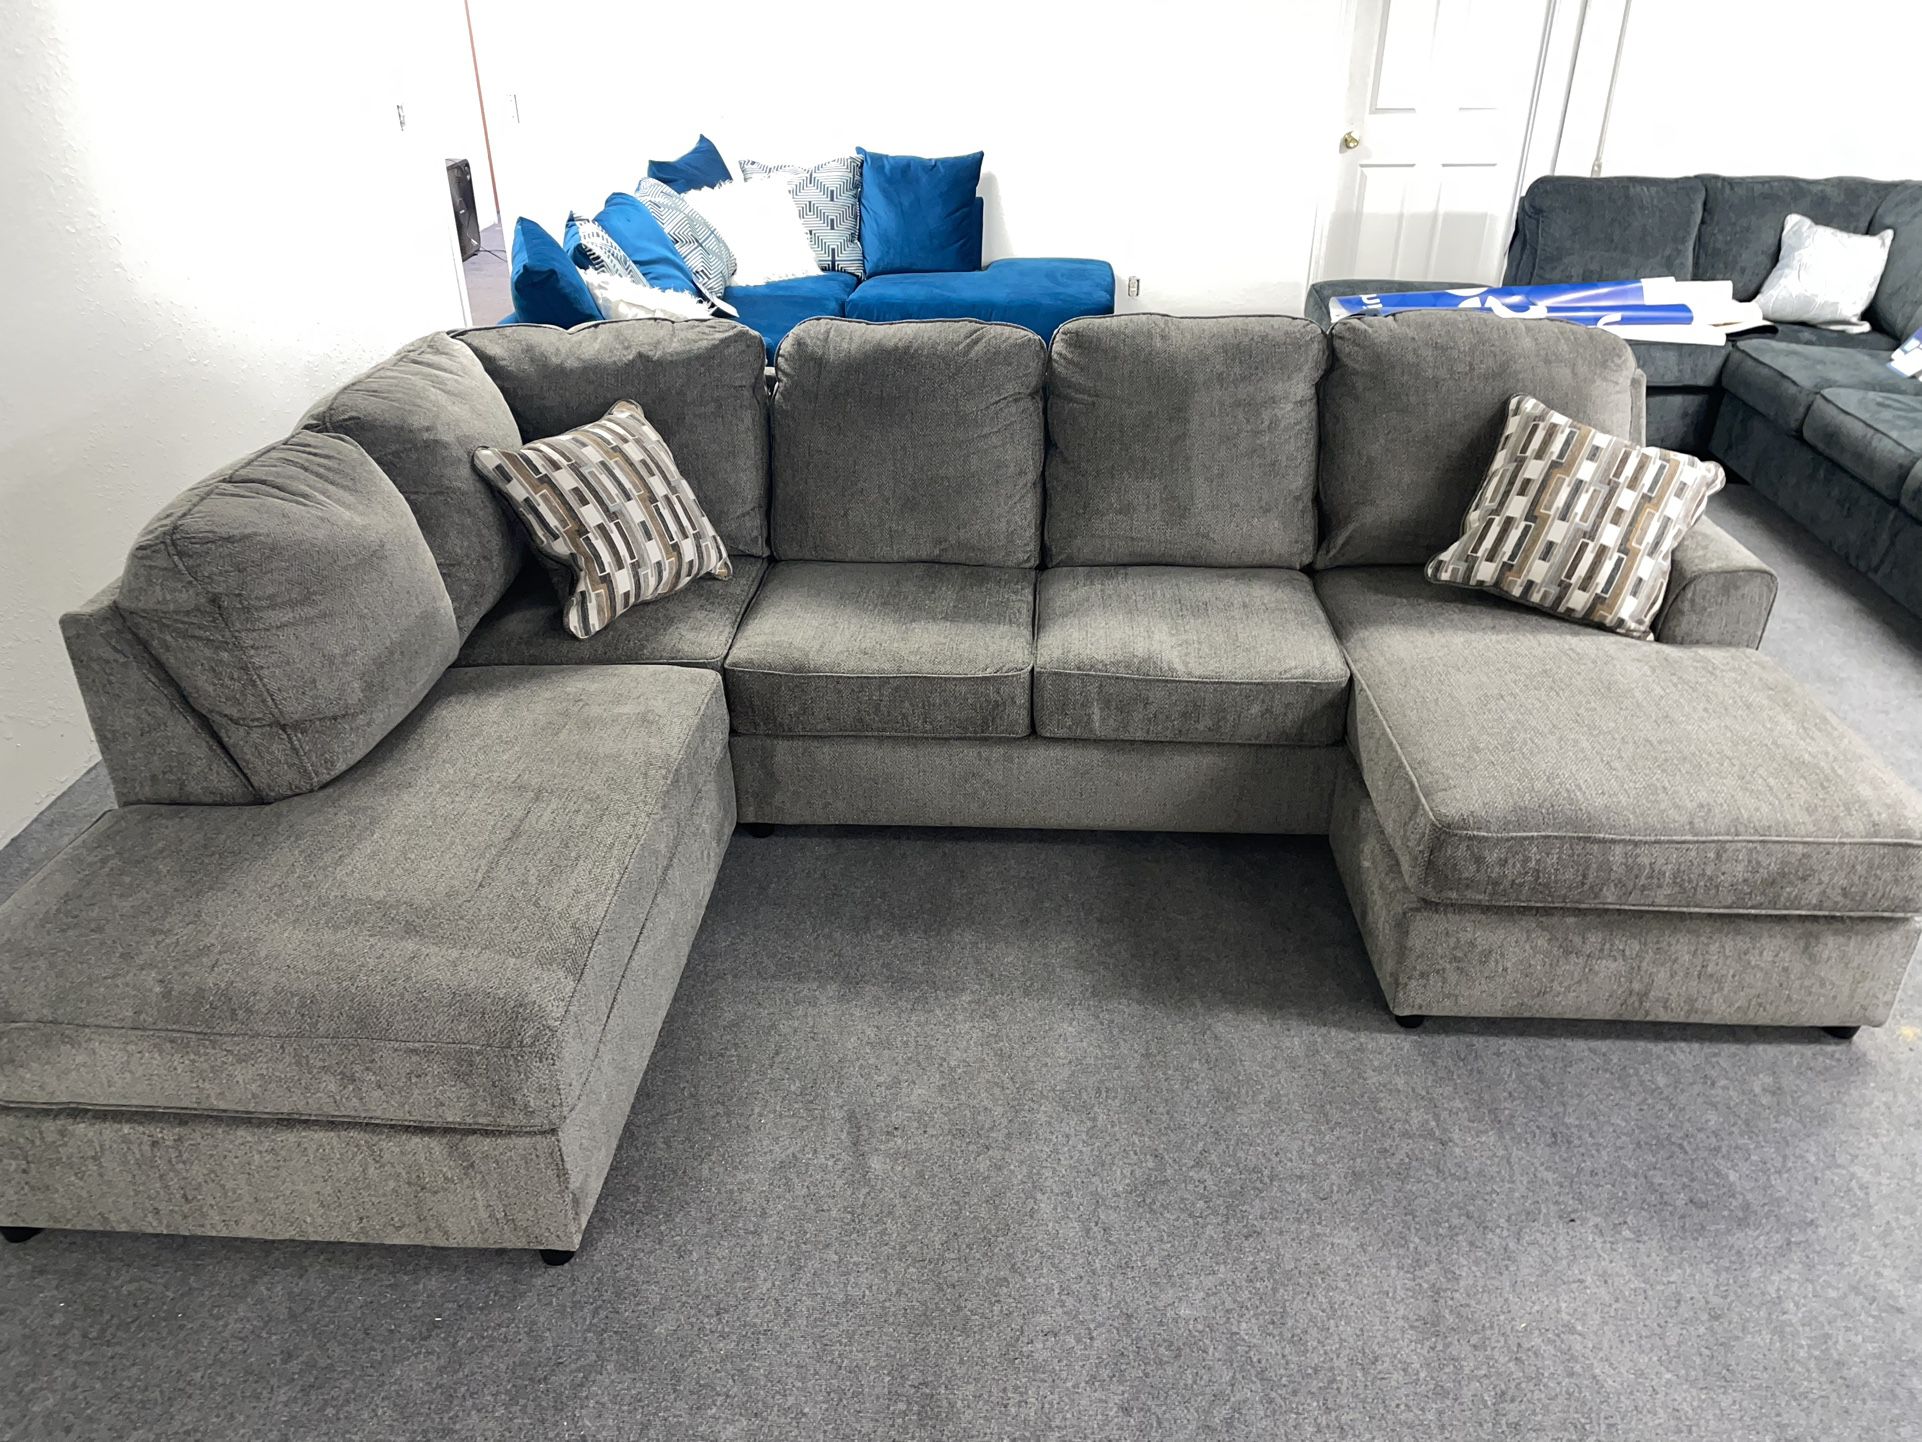 New Sectional  Set  $50 down take home same day 90 days same as cash delivery is available